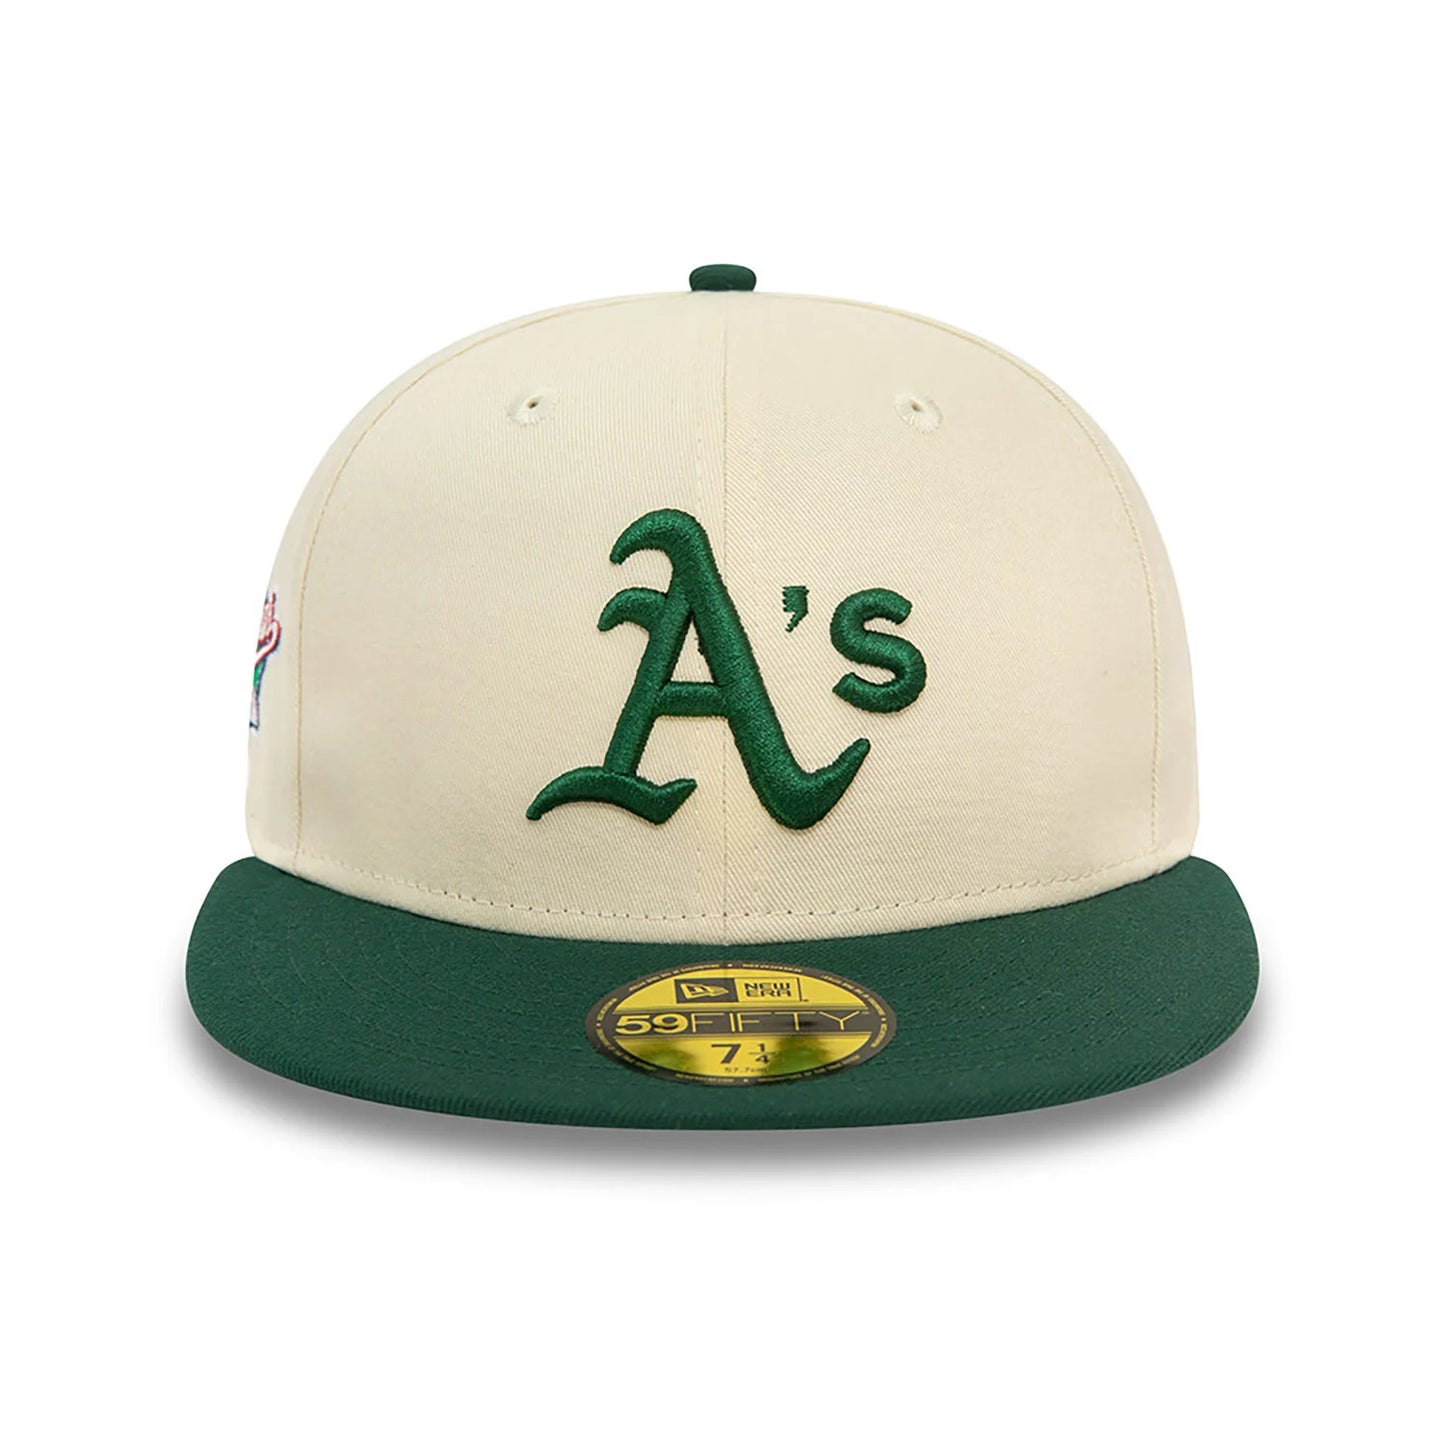 NEW ERA Oakland Athletics Team Colour Stone 59FIFTY Fitted Cap